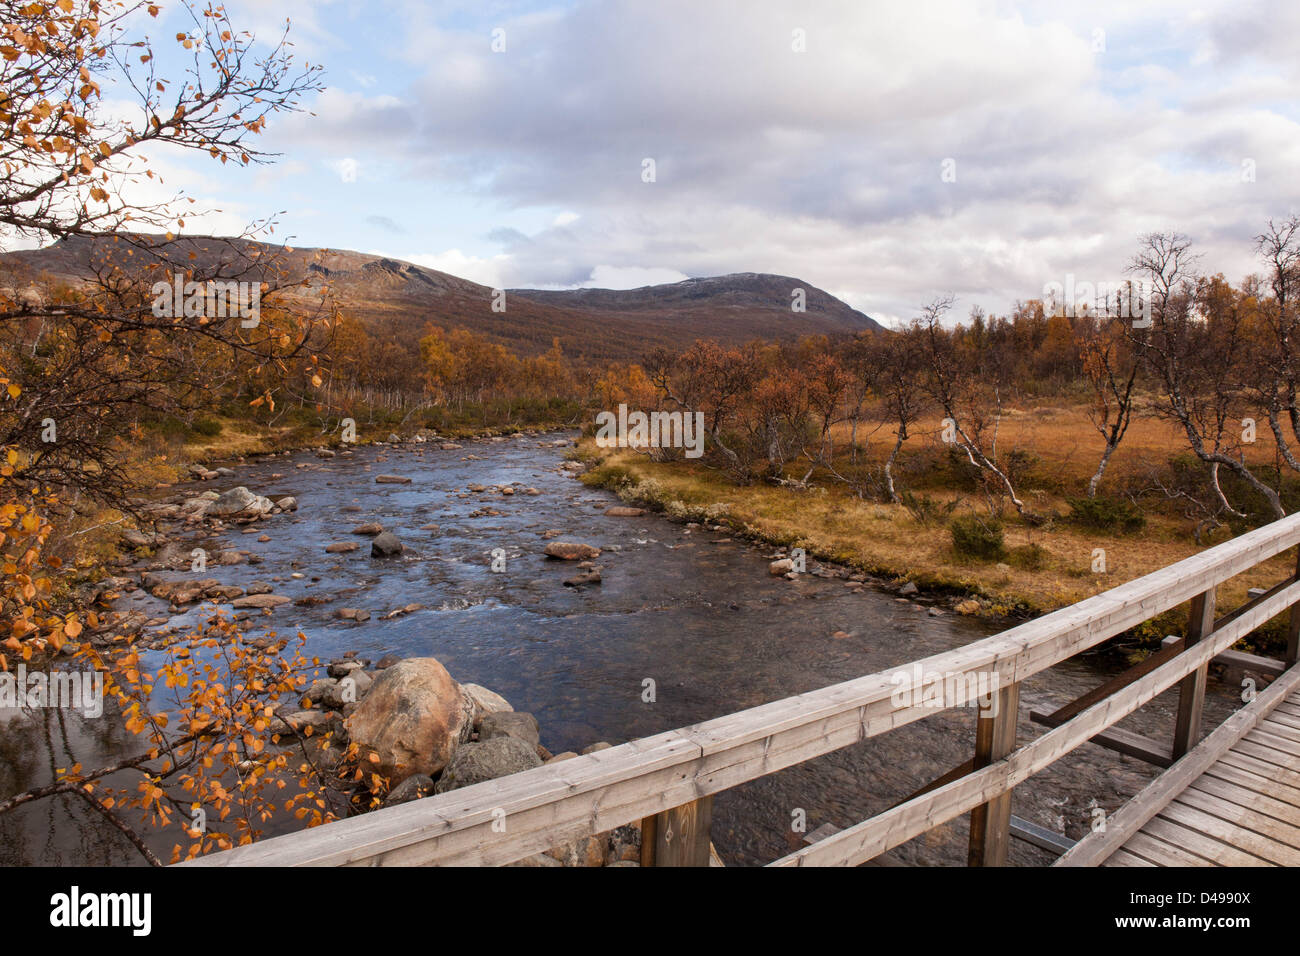 Bridge over a river in autumn time with mountains in the background. Trekking Storulvån in Jämtland, Sweden, Scandinavia. Stock Photo